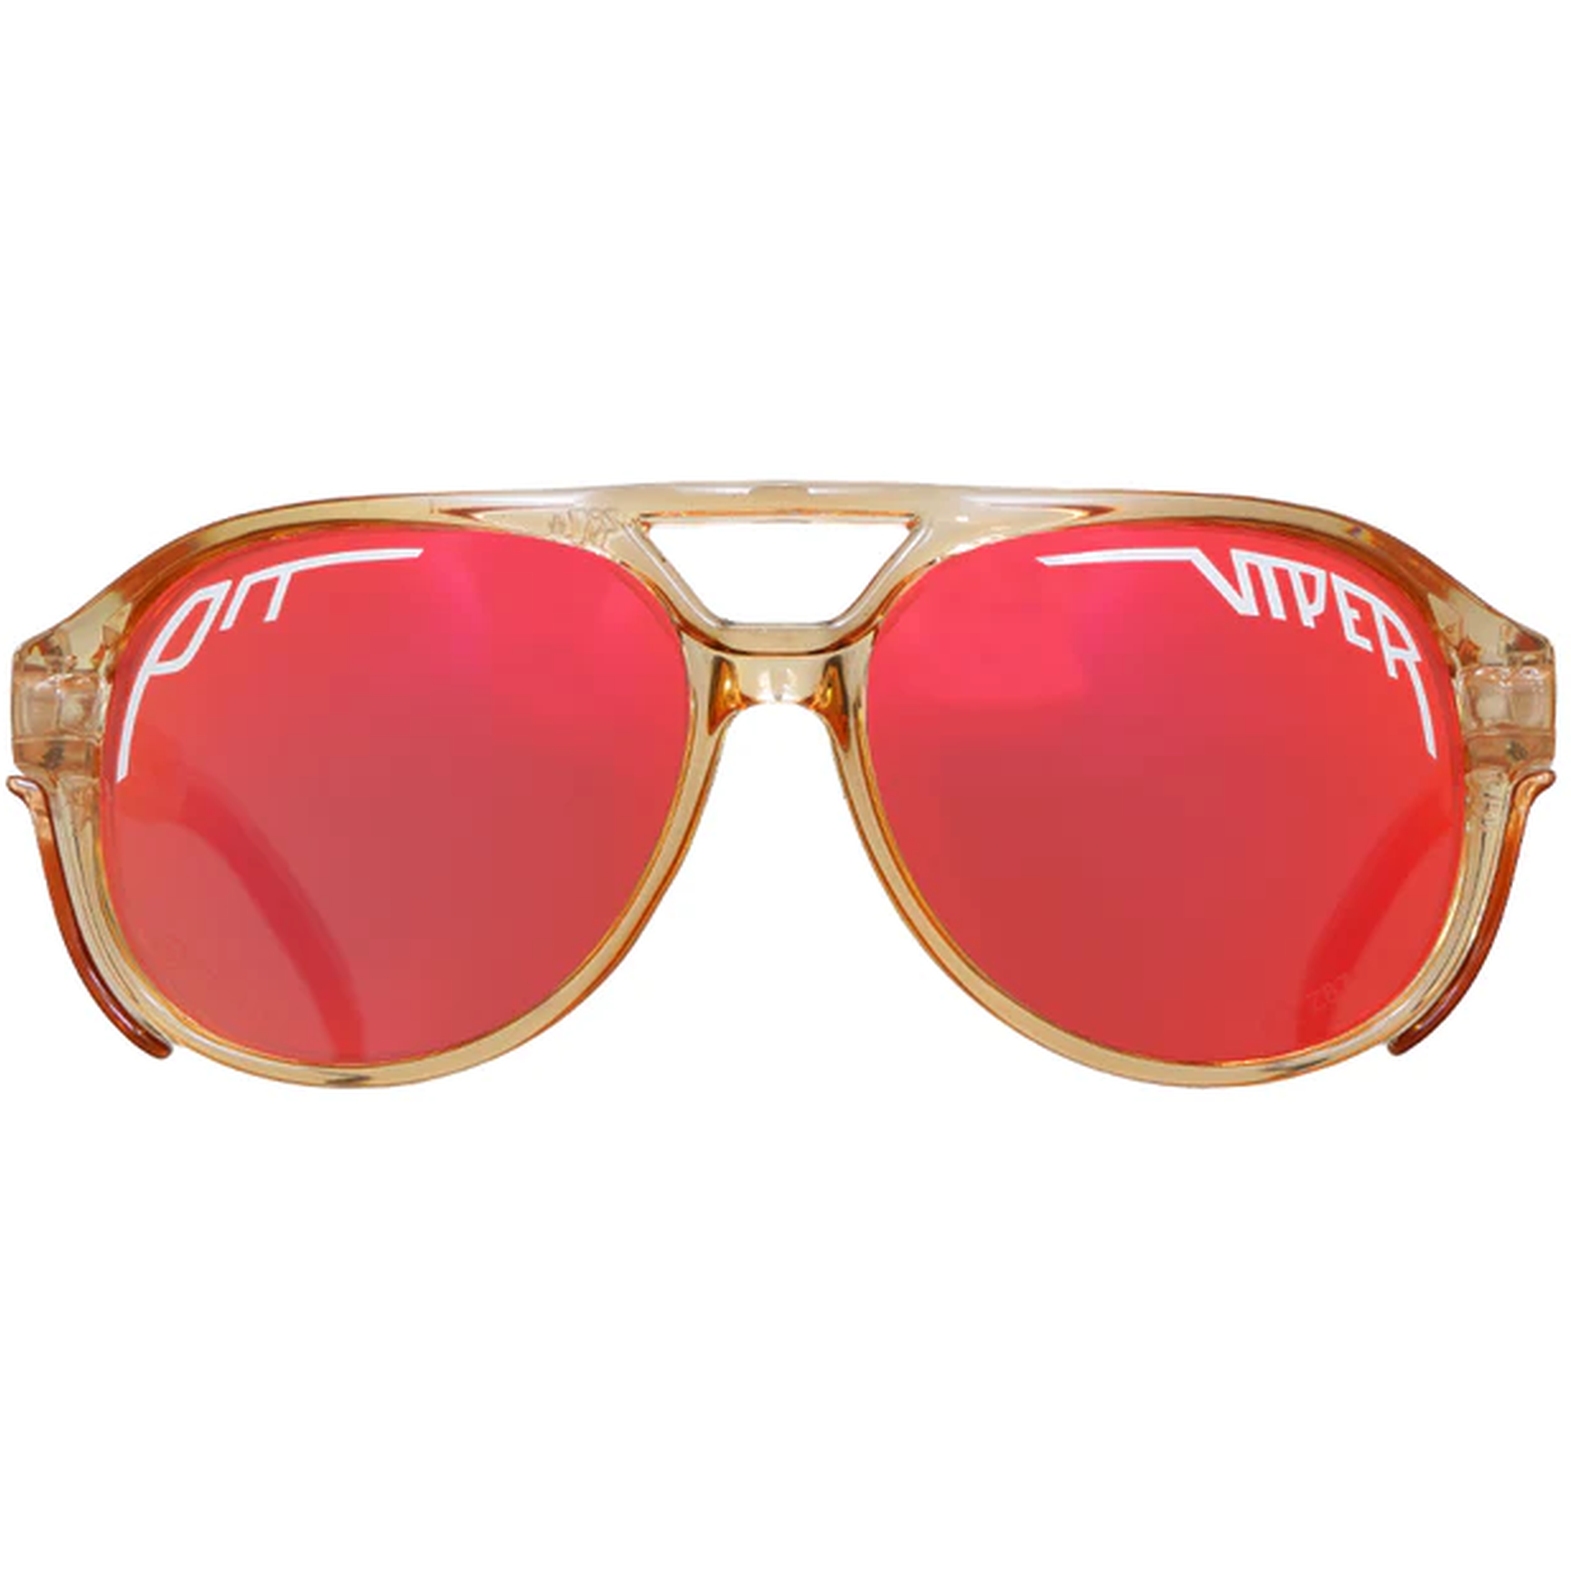 Productfoto van Pit Viper The Exciters Glasses - The Corduroy